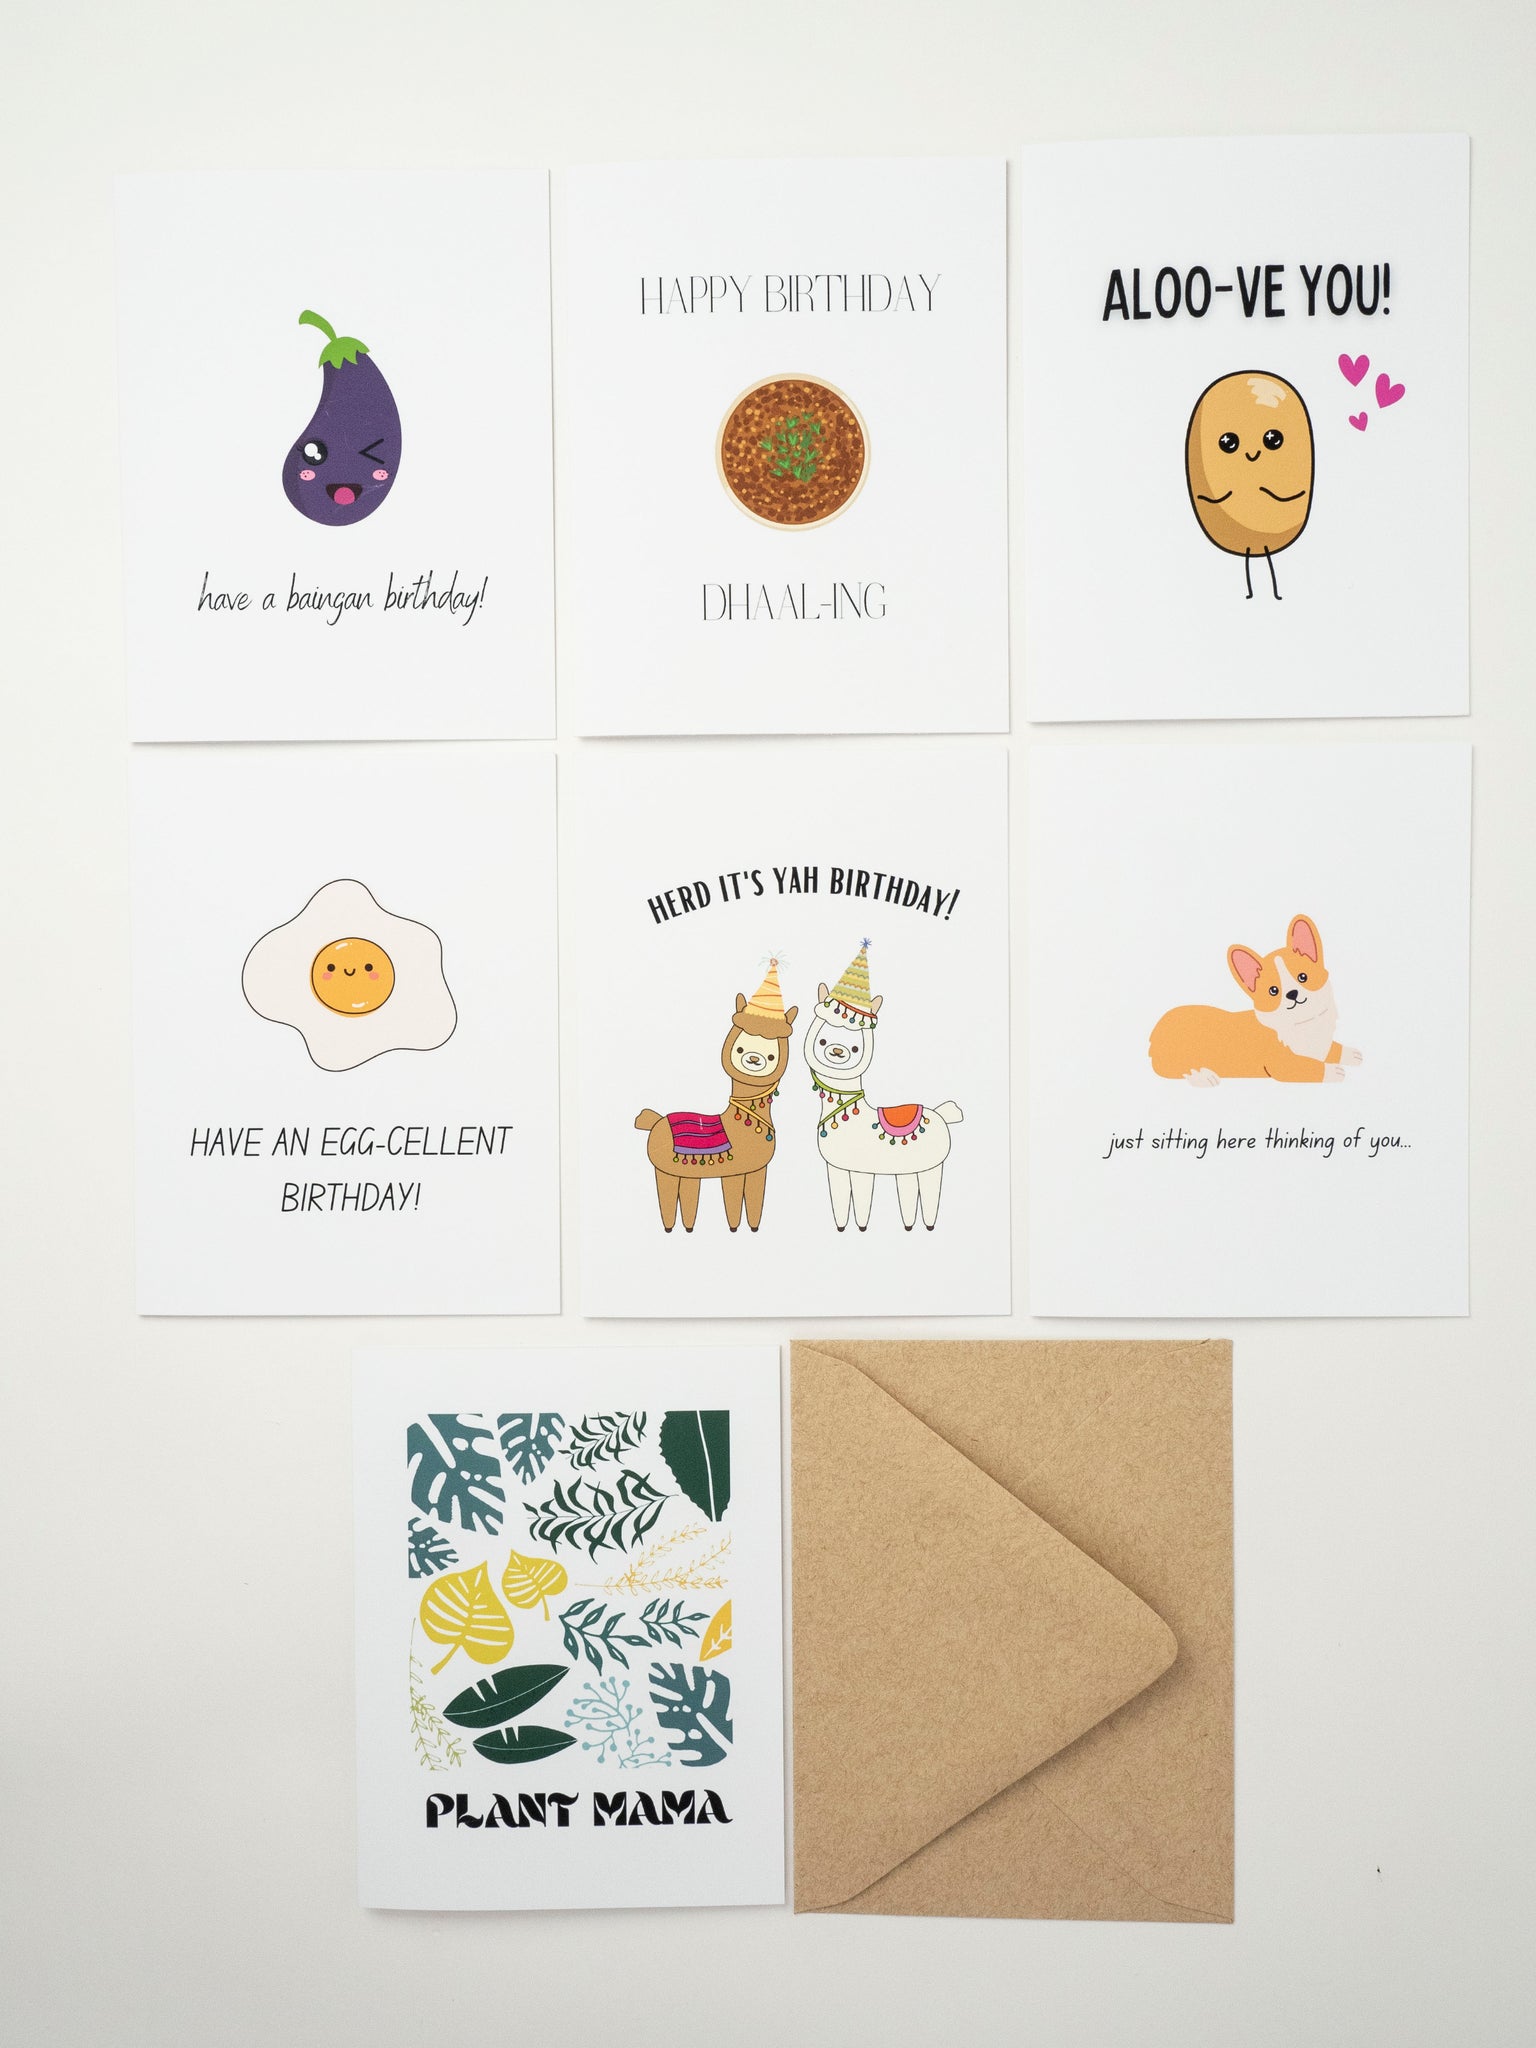 NEW PRODUCT ALERT: Greeting Cards